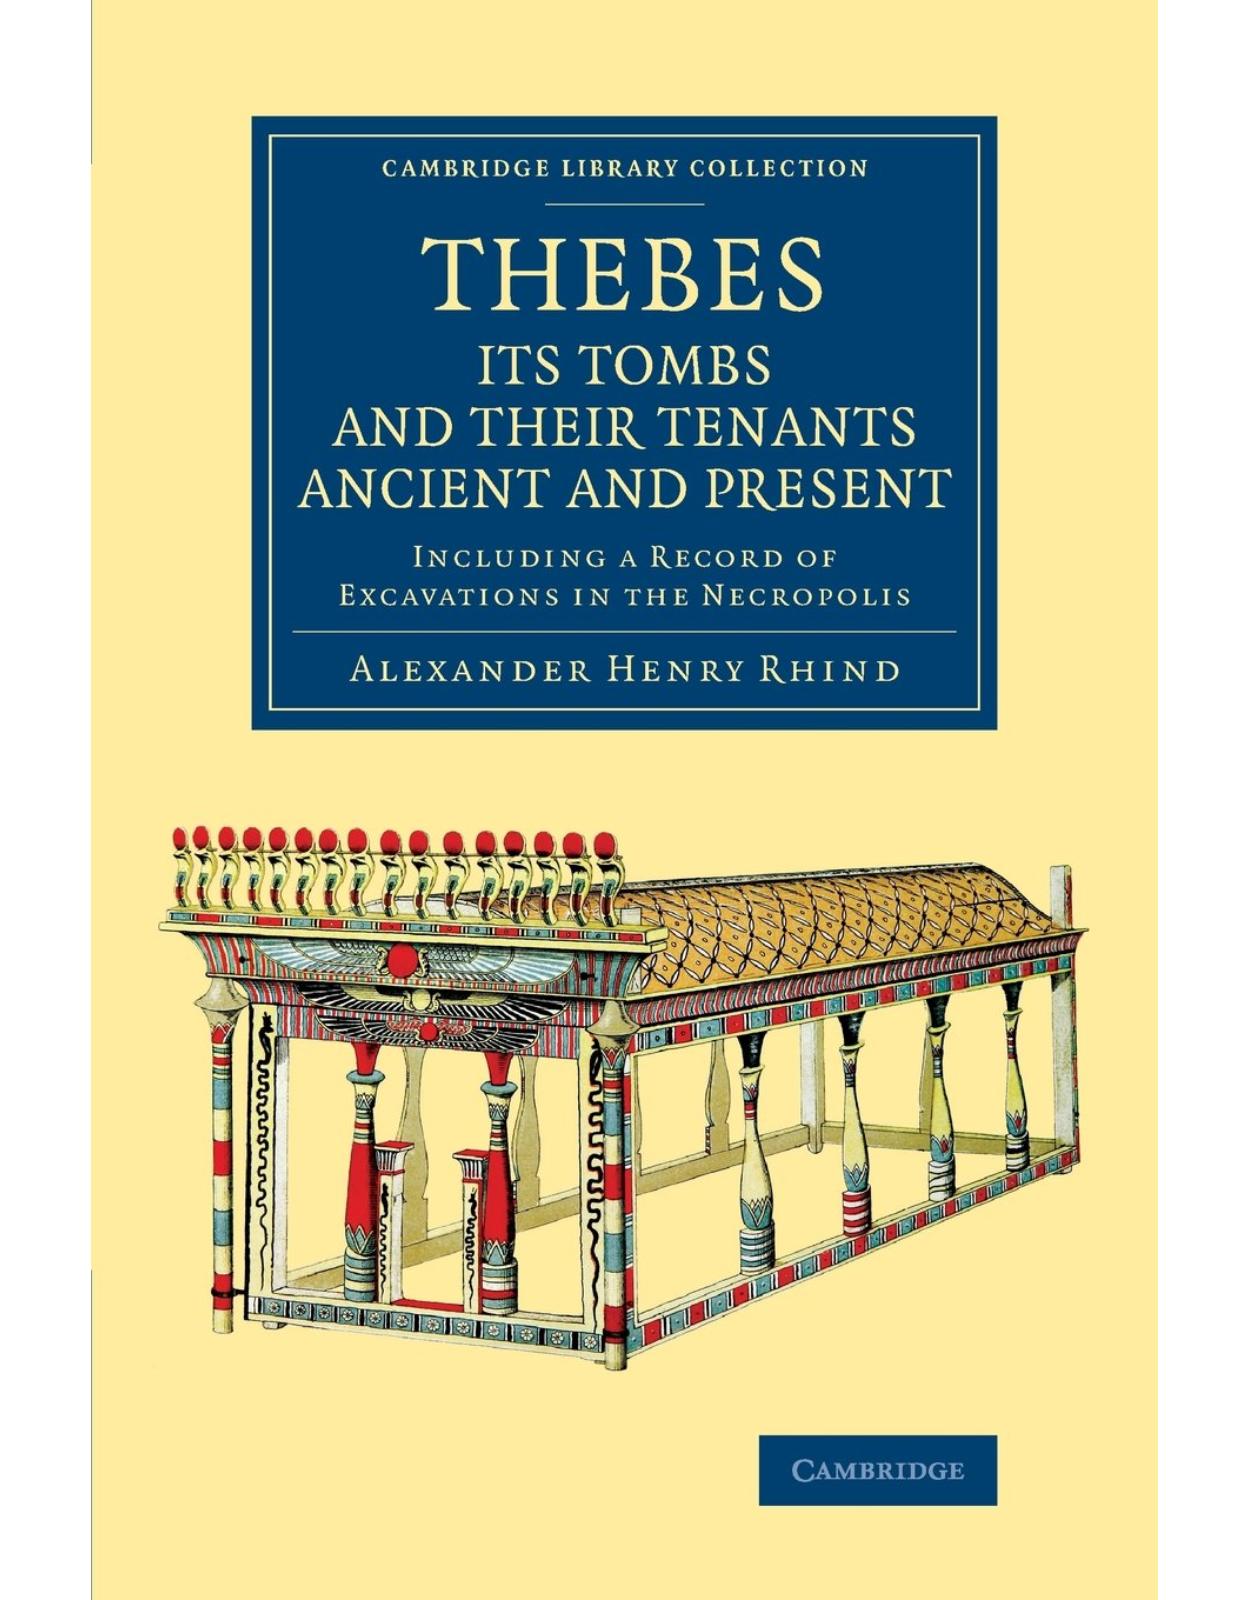 Thebes, its Tombs and their Tenants Ancient and Present: Including a Record of Excavations in the Necropolis (Cambridge Library Collection - Egyptology)